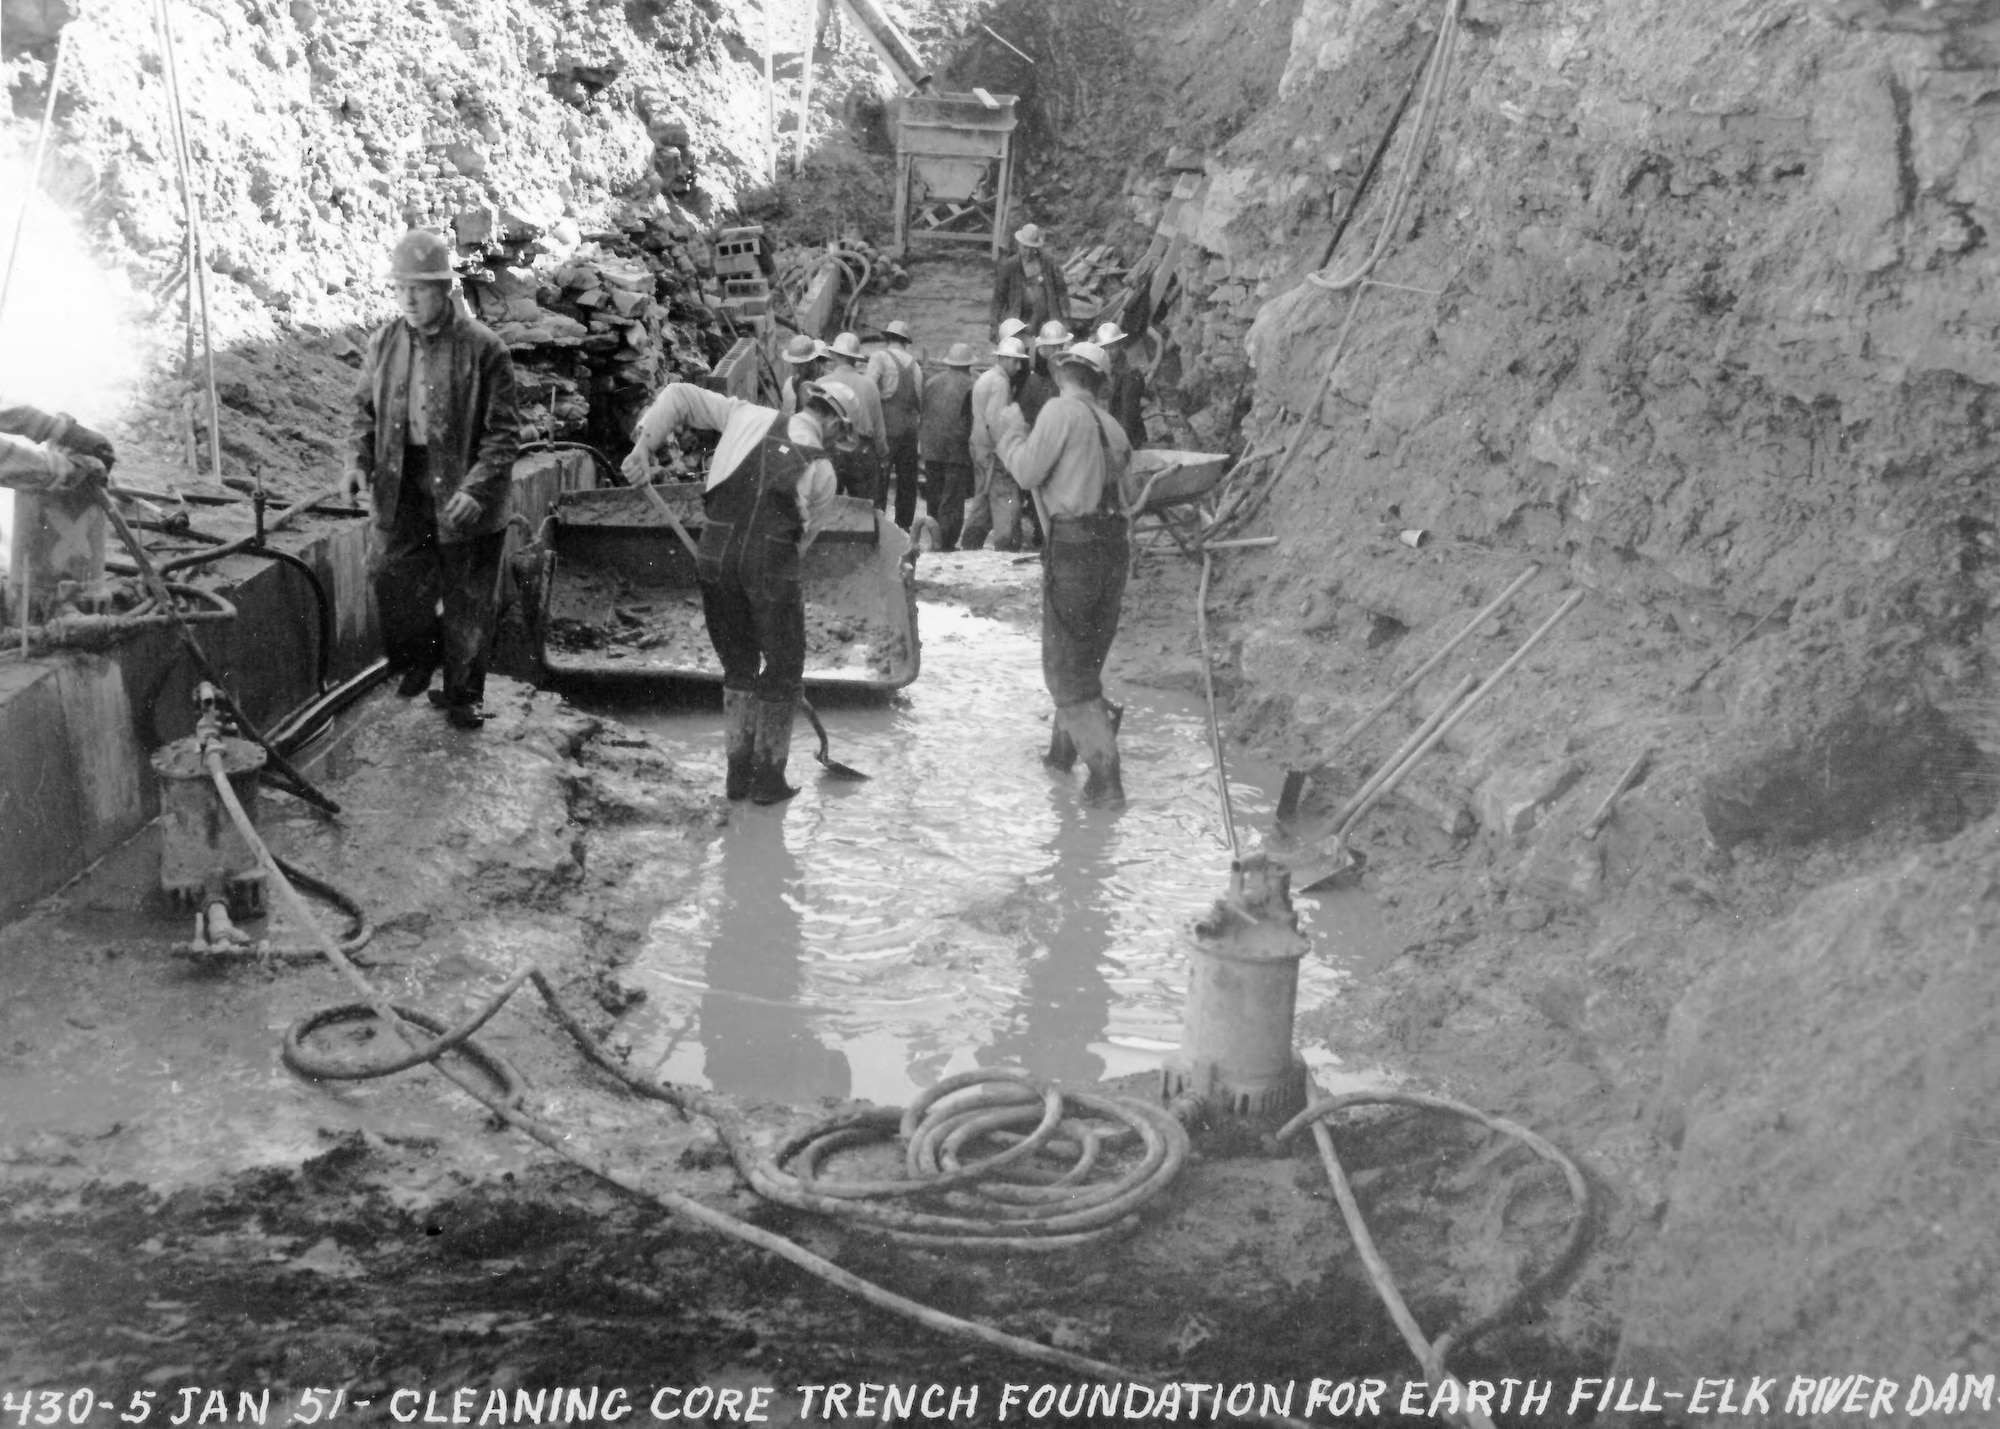 Crews work to clear a trench in January 1951 as part of the Elk River Dam project. The dam, constructed to create Woods Reservoir, was completed 70 years ago this month. Woods Reservoir has since supplied cooling water to the test facilities at Arnold Air Force Base, Tennessee. Arnold AFB is the headquarters of the Arnold Engineering Development Complex. (U.S. Air Force photo)